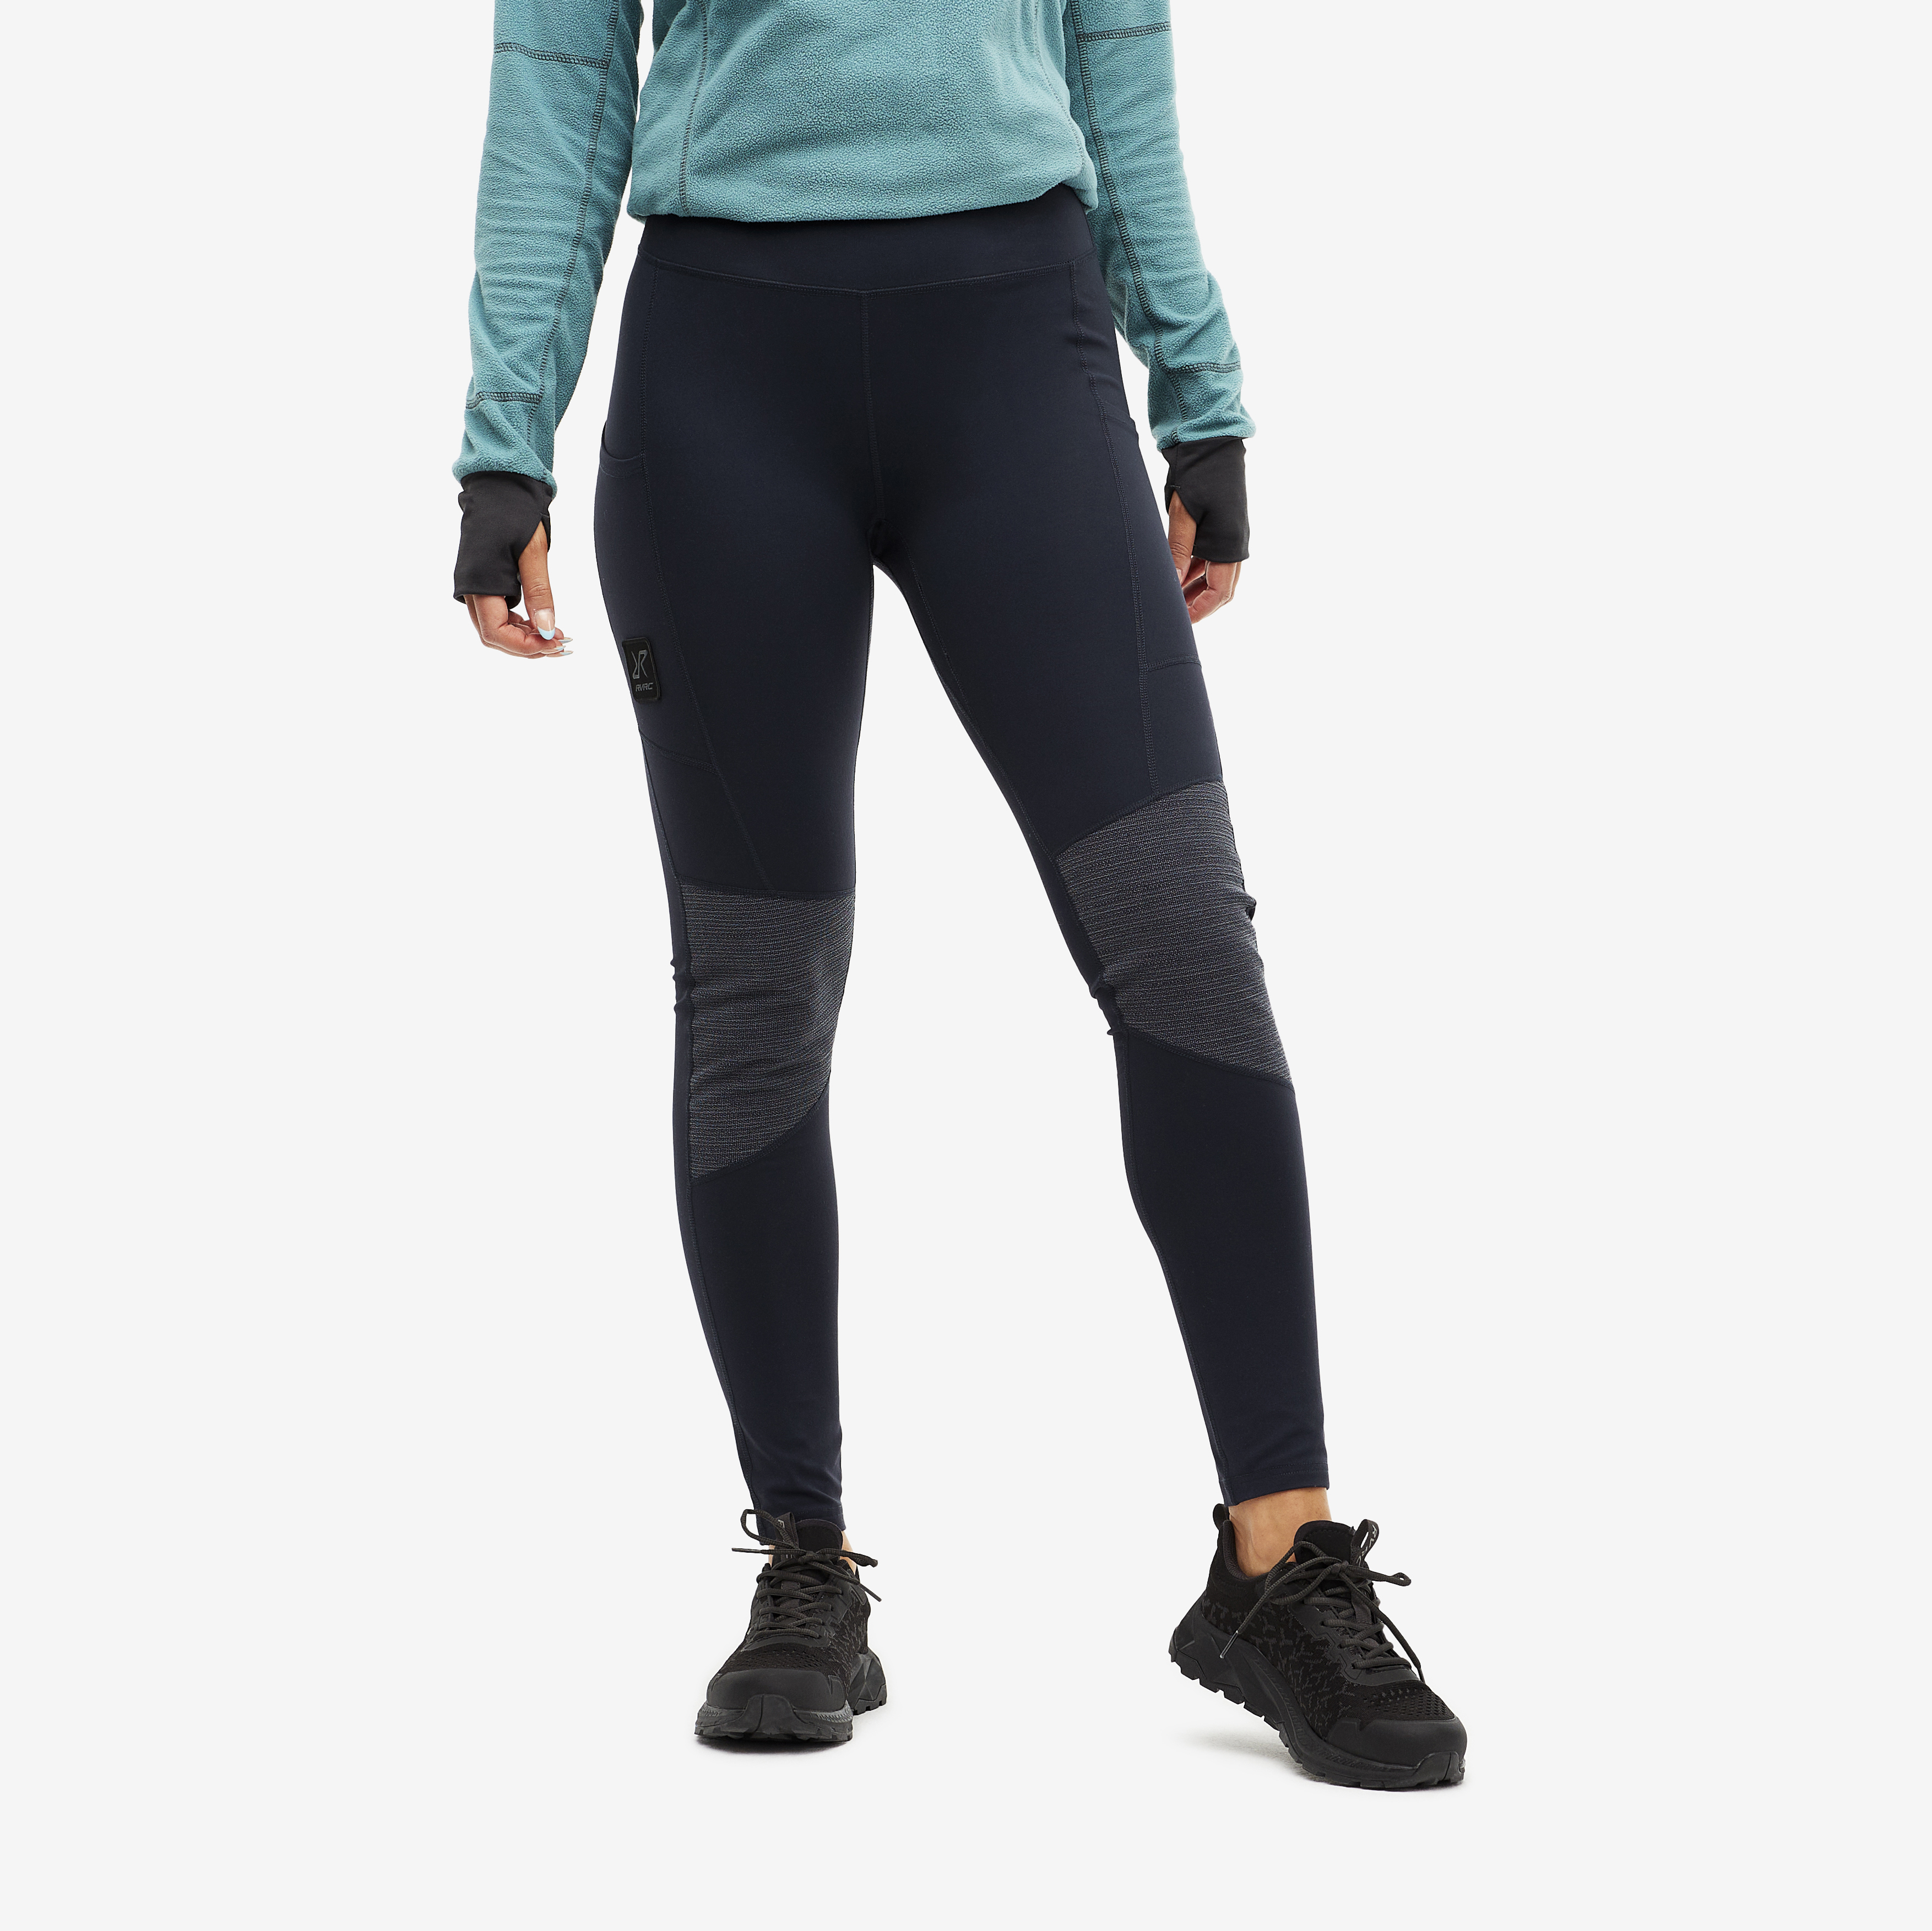 Summit Core Tights - Dam - Peacemaker Blue, Storlek:S - Outdoor Tights